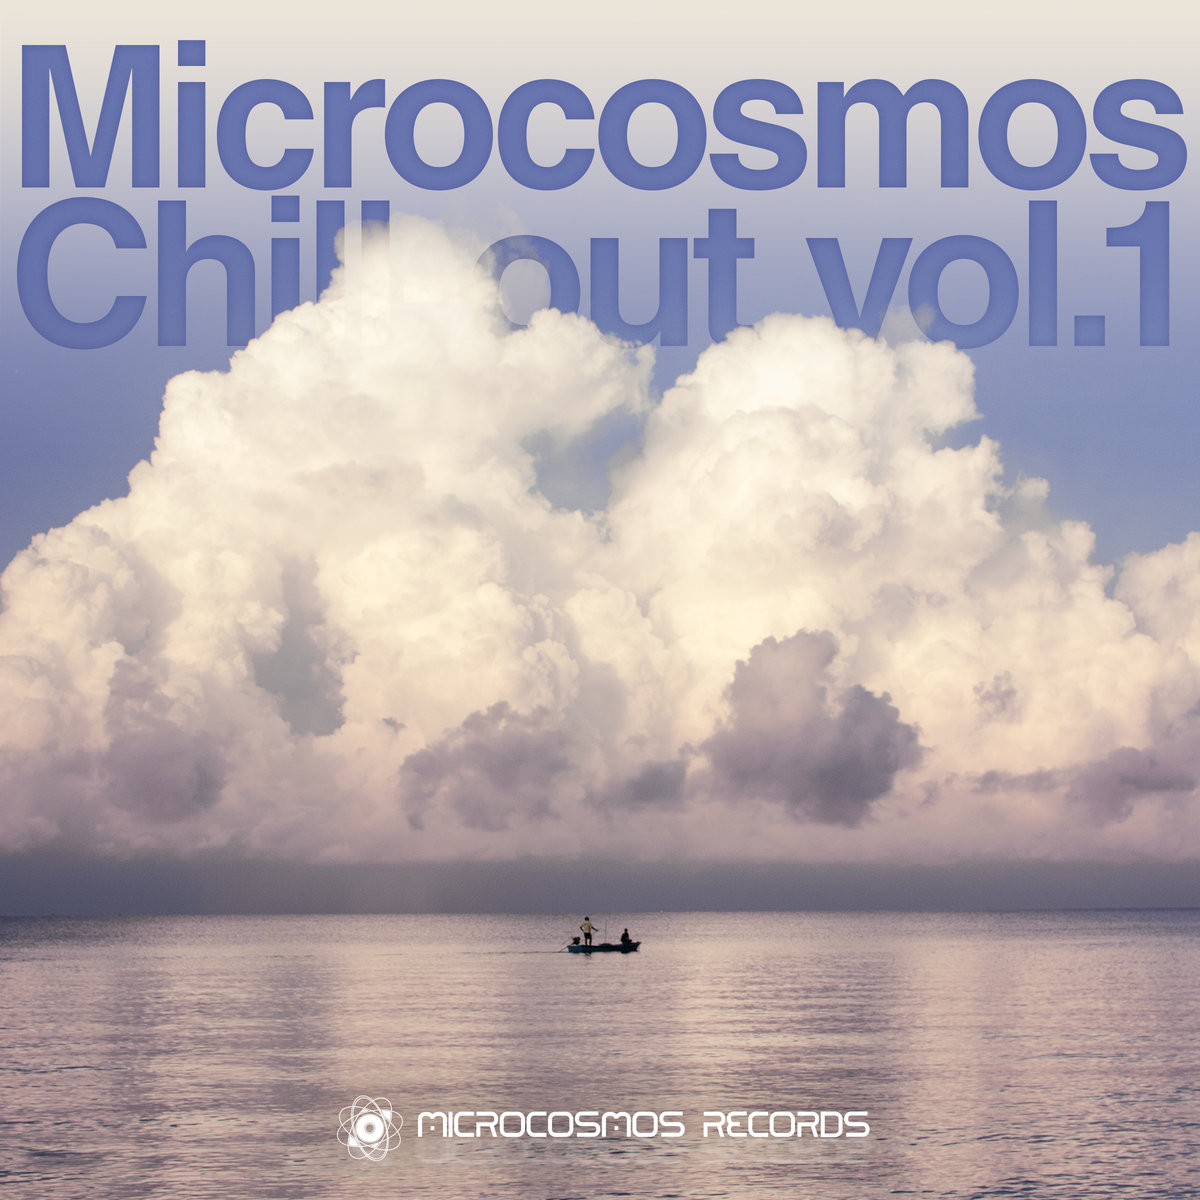 Side Liner - Wish I Was A Kid Again @ 'Various Artists - Microcosmos Chill-out Vol.1' album (ambient, chill-out)